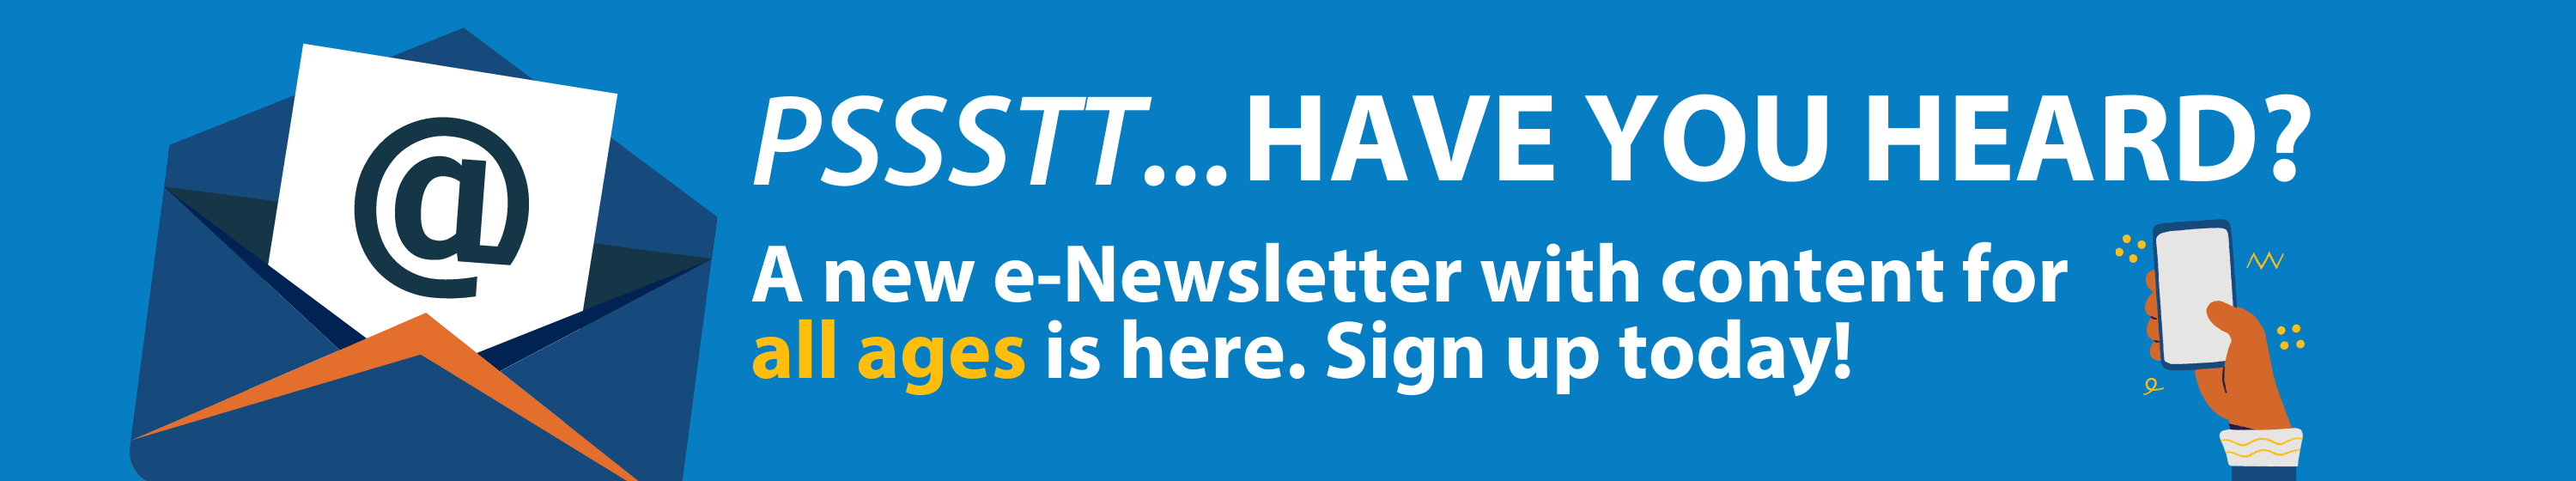 A new e-Newsletter with content for all ages is here. Sign up today!